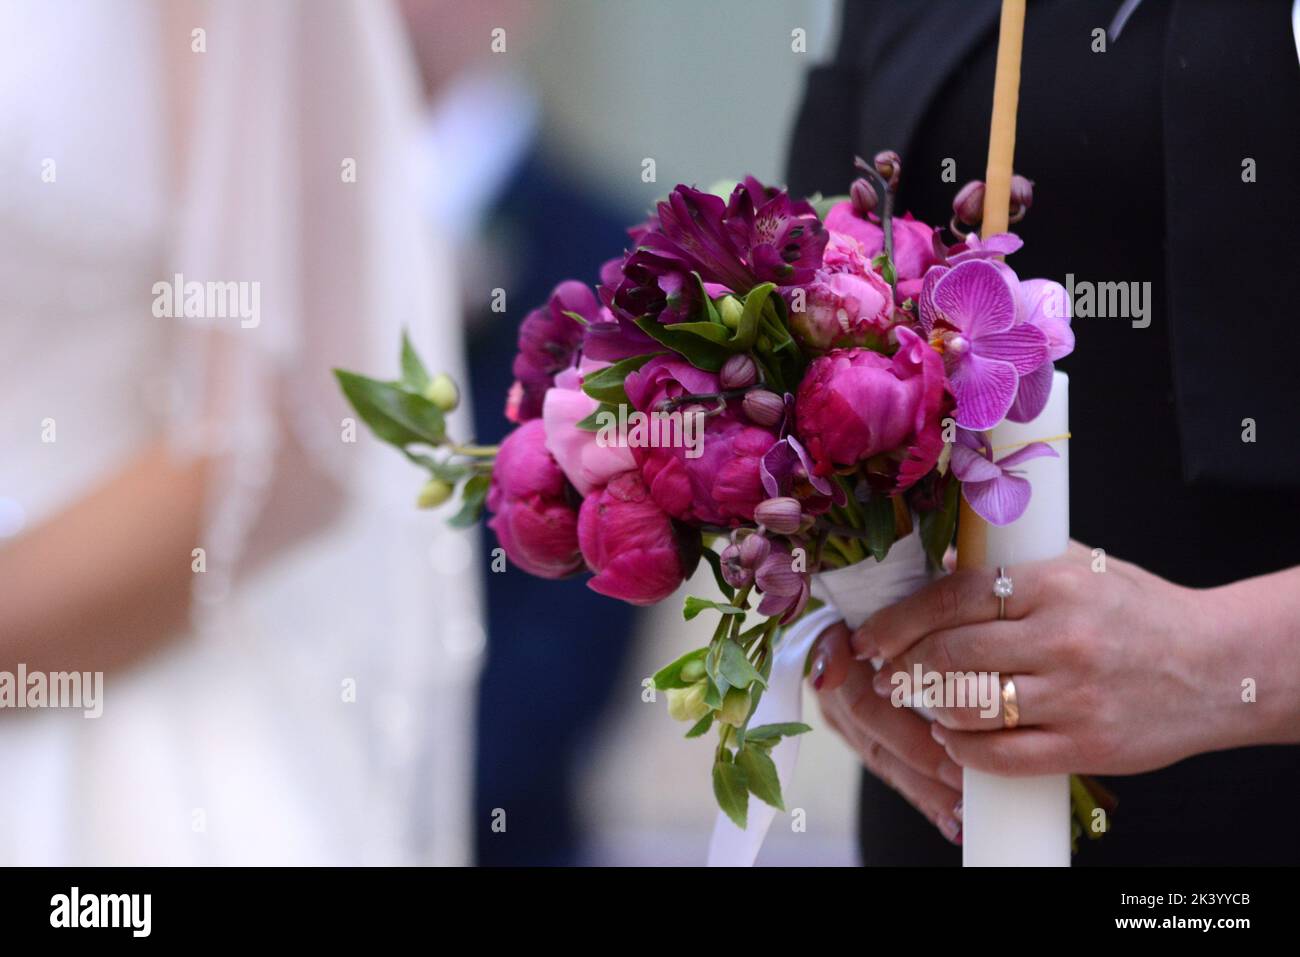 The godmother's bouquet. Bouquet with predominantly pink flowers. Stock Photo